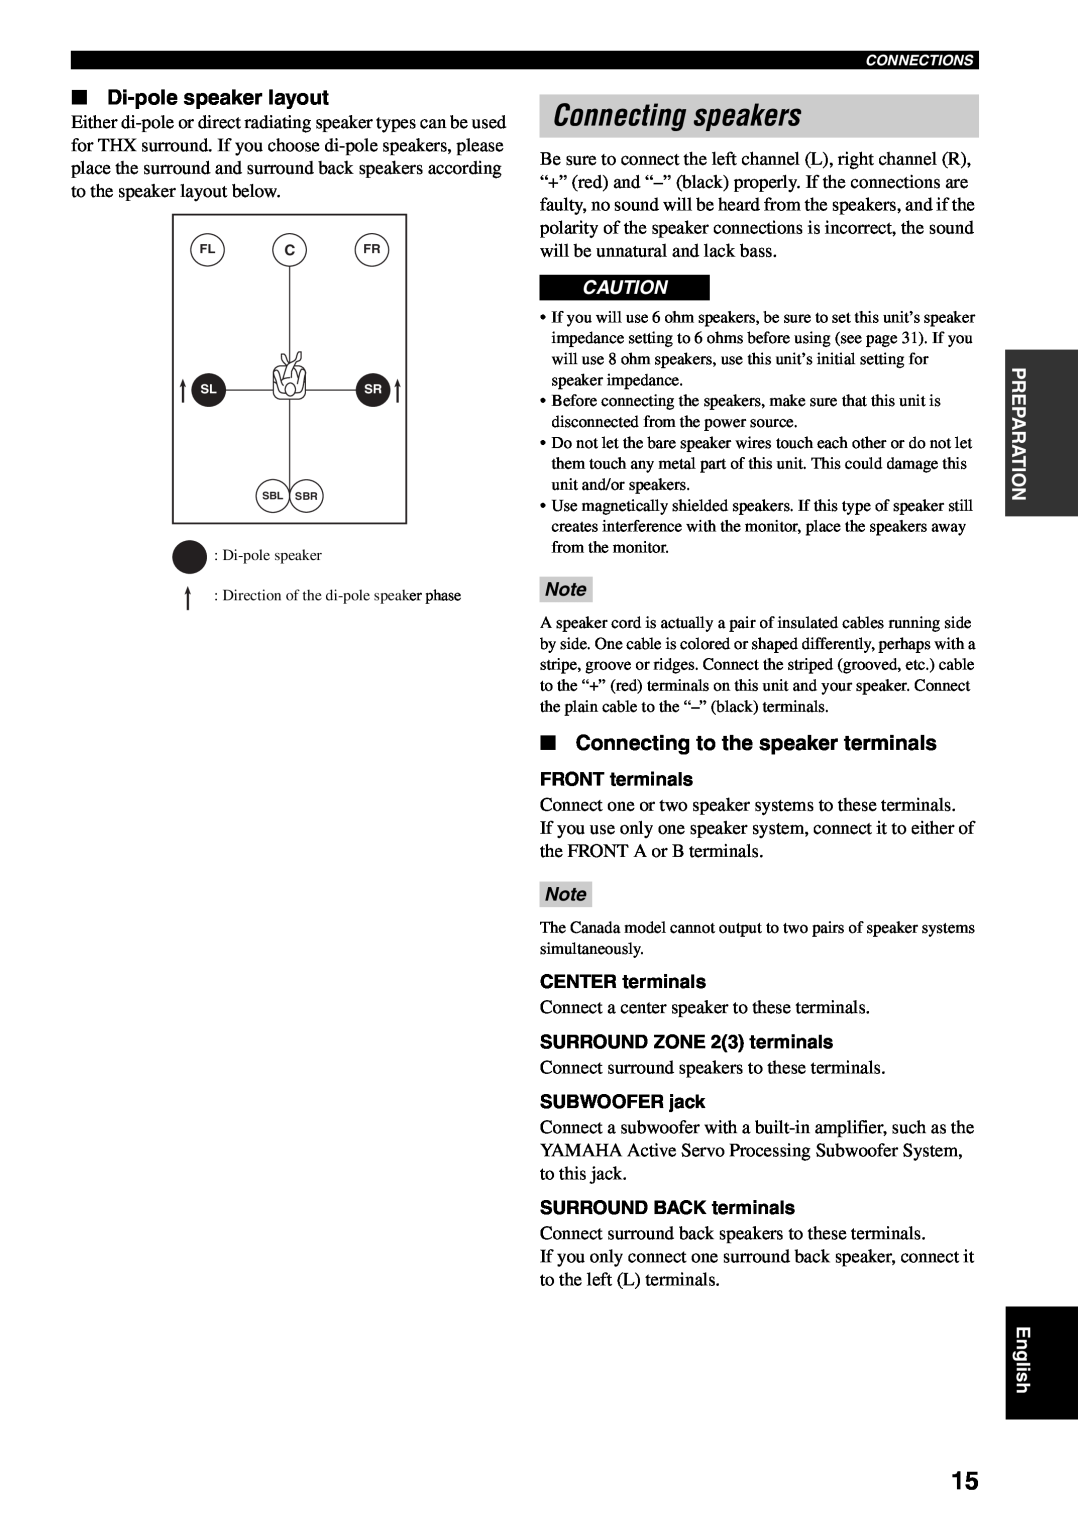 Yamaha RX-V1600 owner manual Connecting speakers, Di-polespeaker layout, Connecting to the speaker terminals 